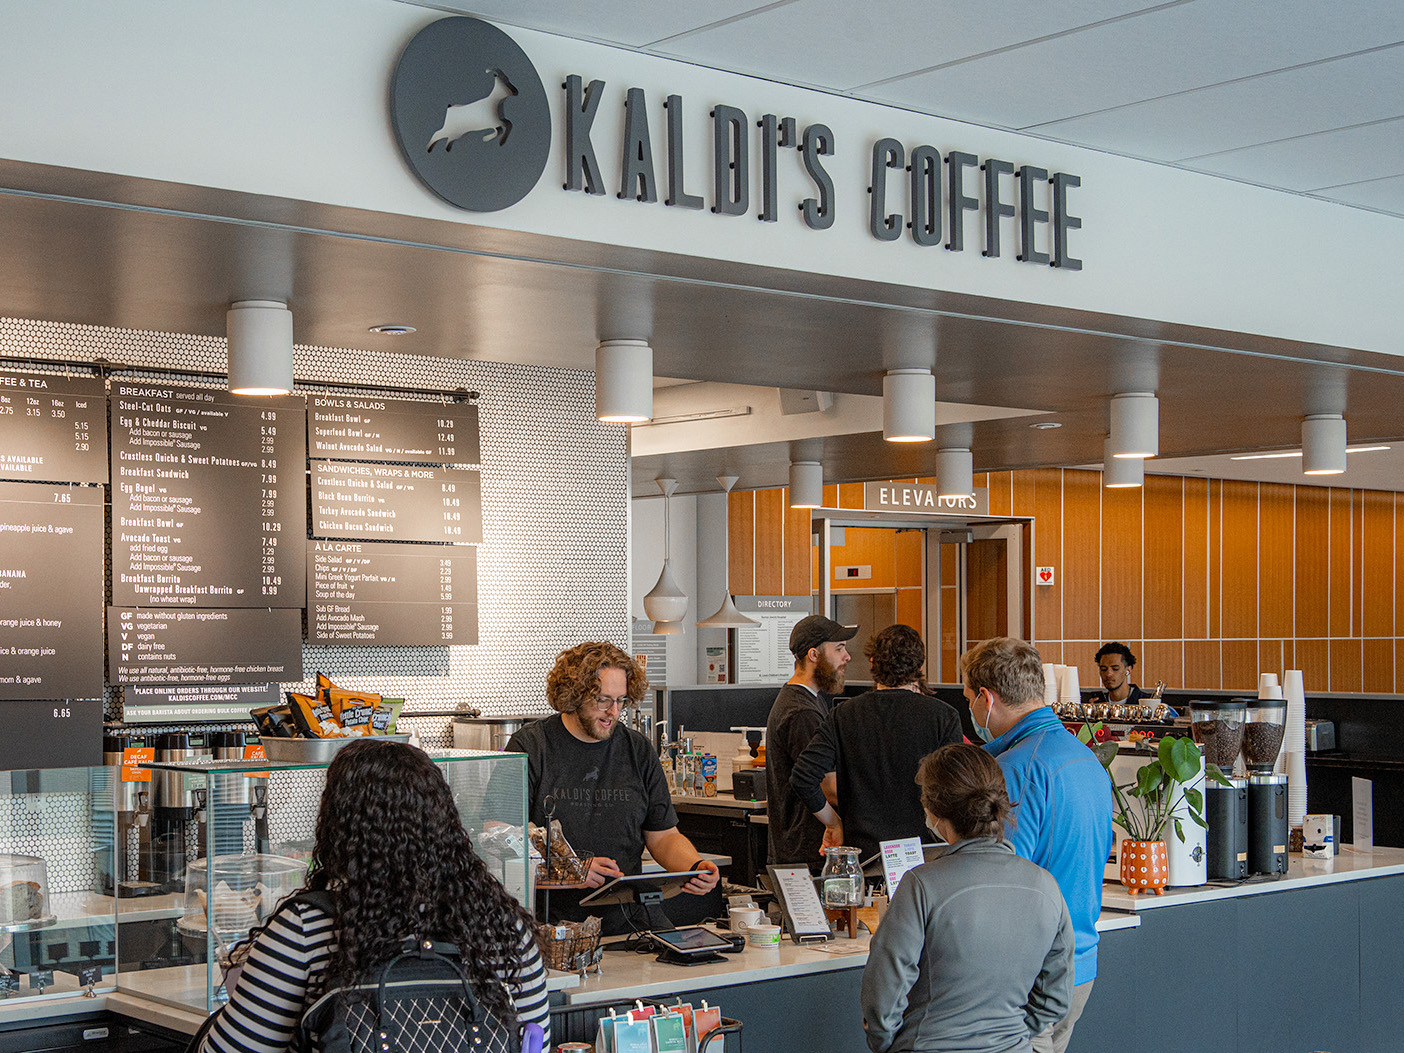 A Kaldi's Coffee cafe counter showing guests placing orders at the Toast terminal